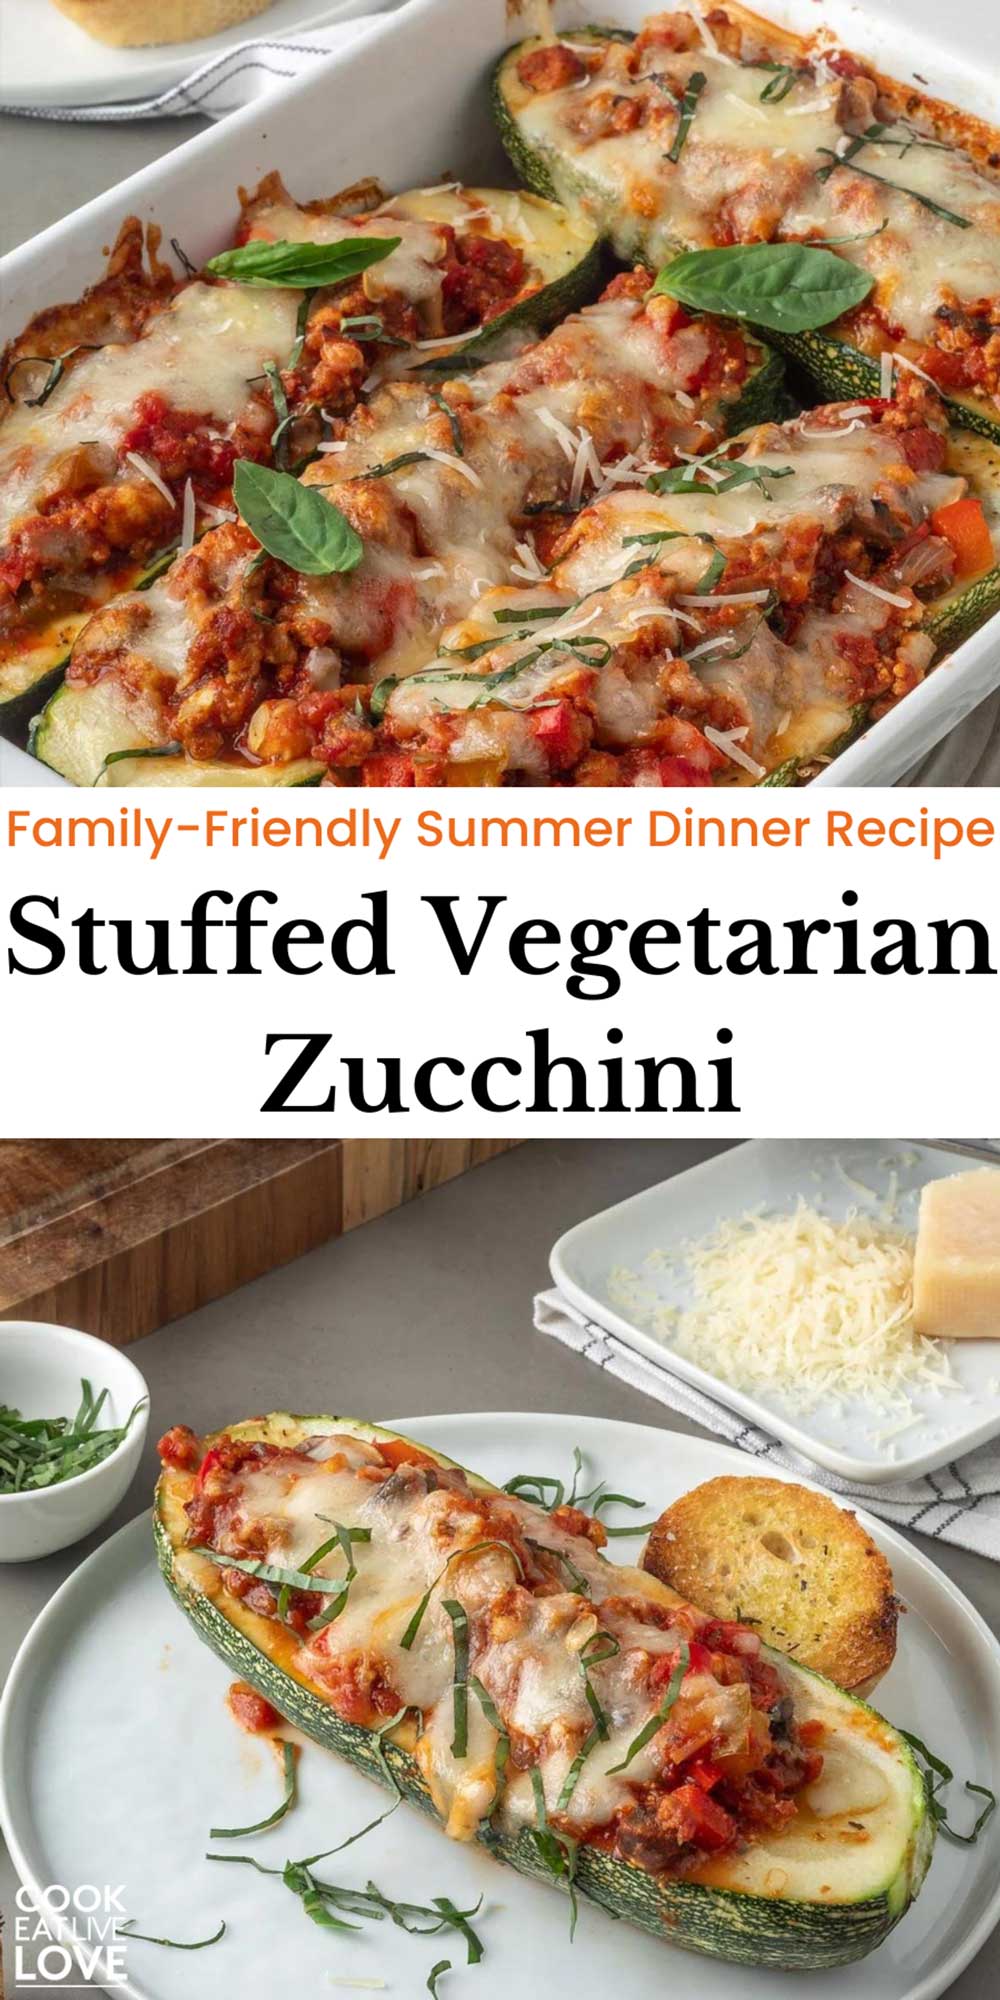 Pin for pinterest graphic with images of stuffed zucchini and text on top.